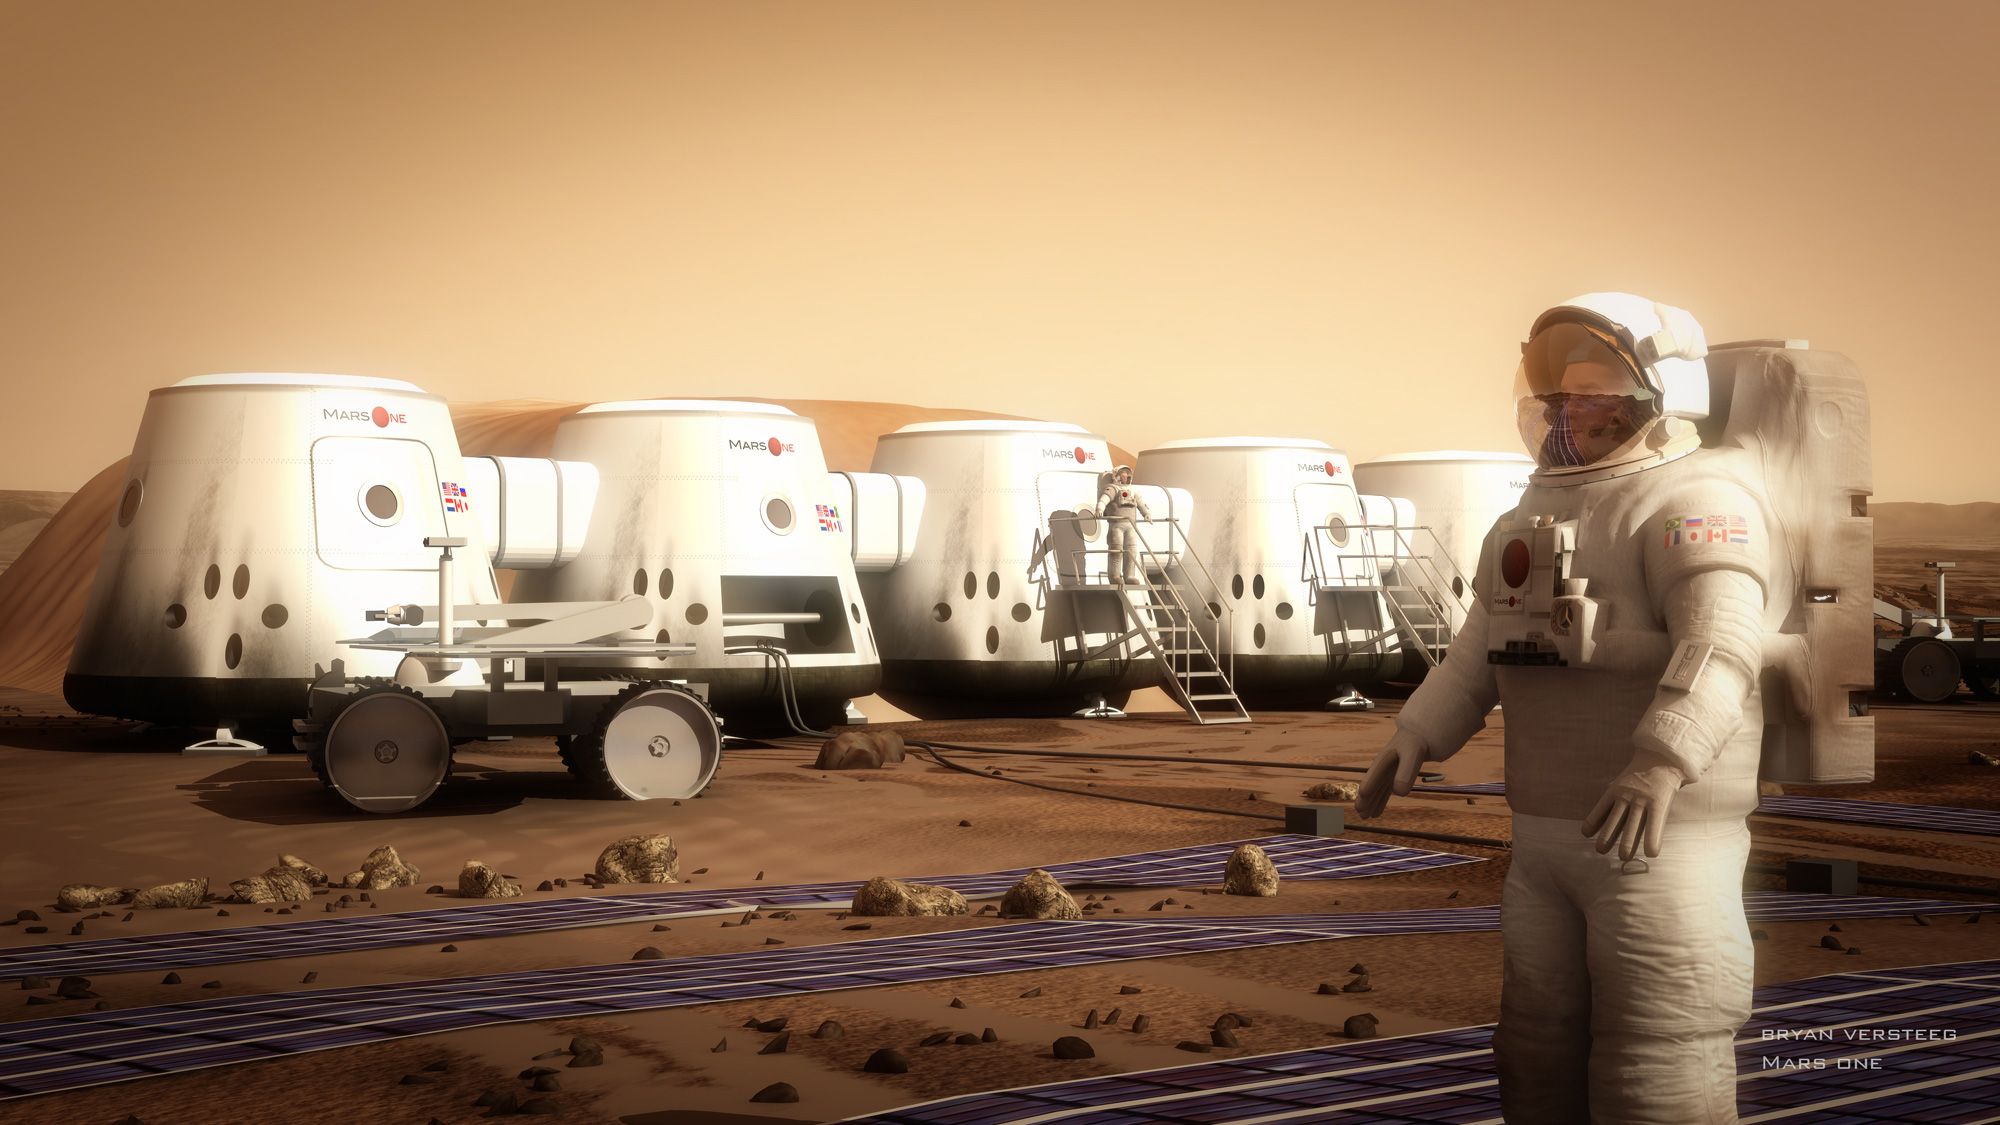 Mars One (and done?), MIT News